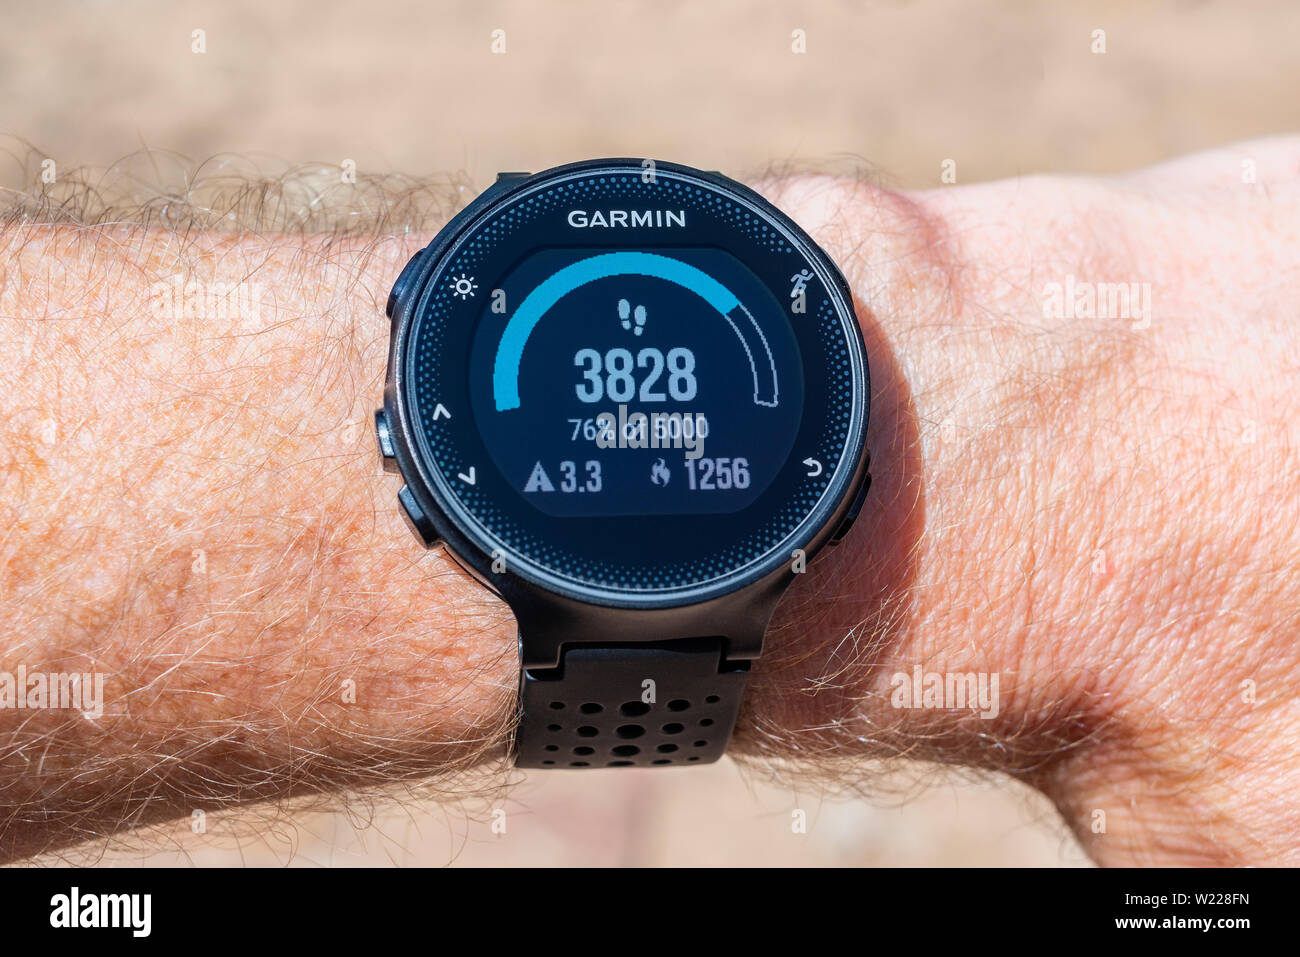 Garmin Smart Watch on male wrist displaying a step counter, distance traveled in kilometers and amount of calories burned Stock Photo